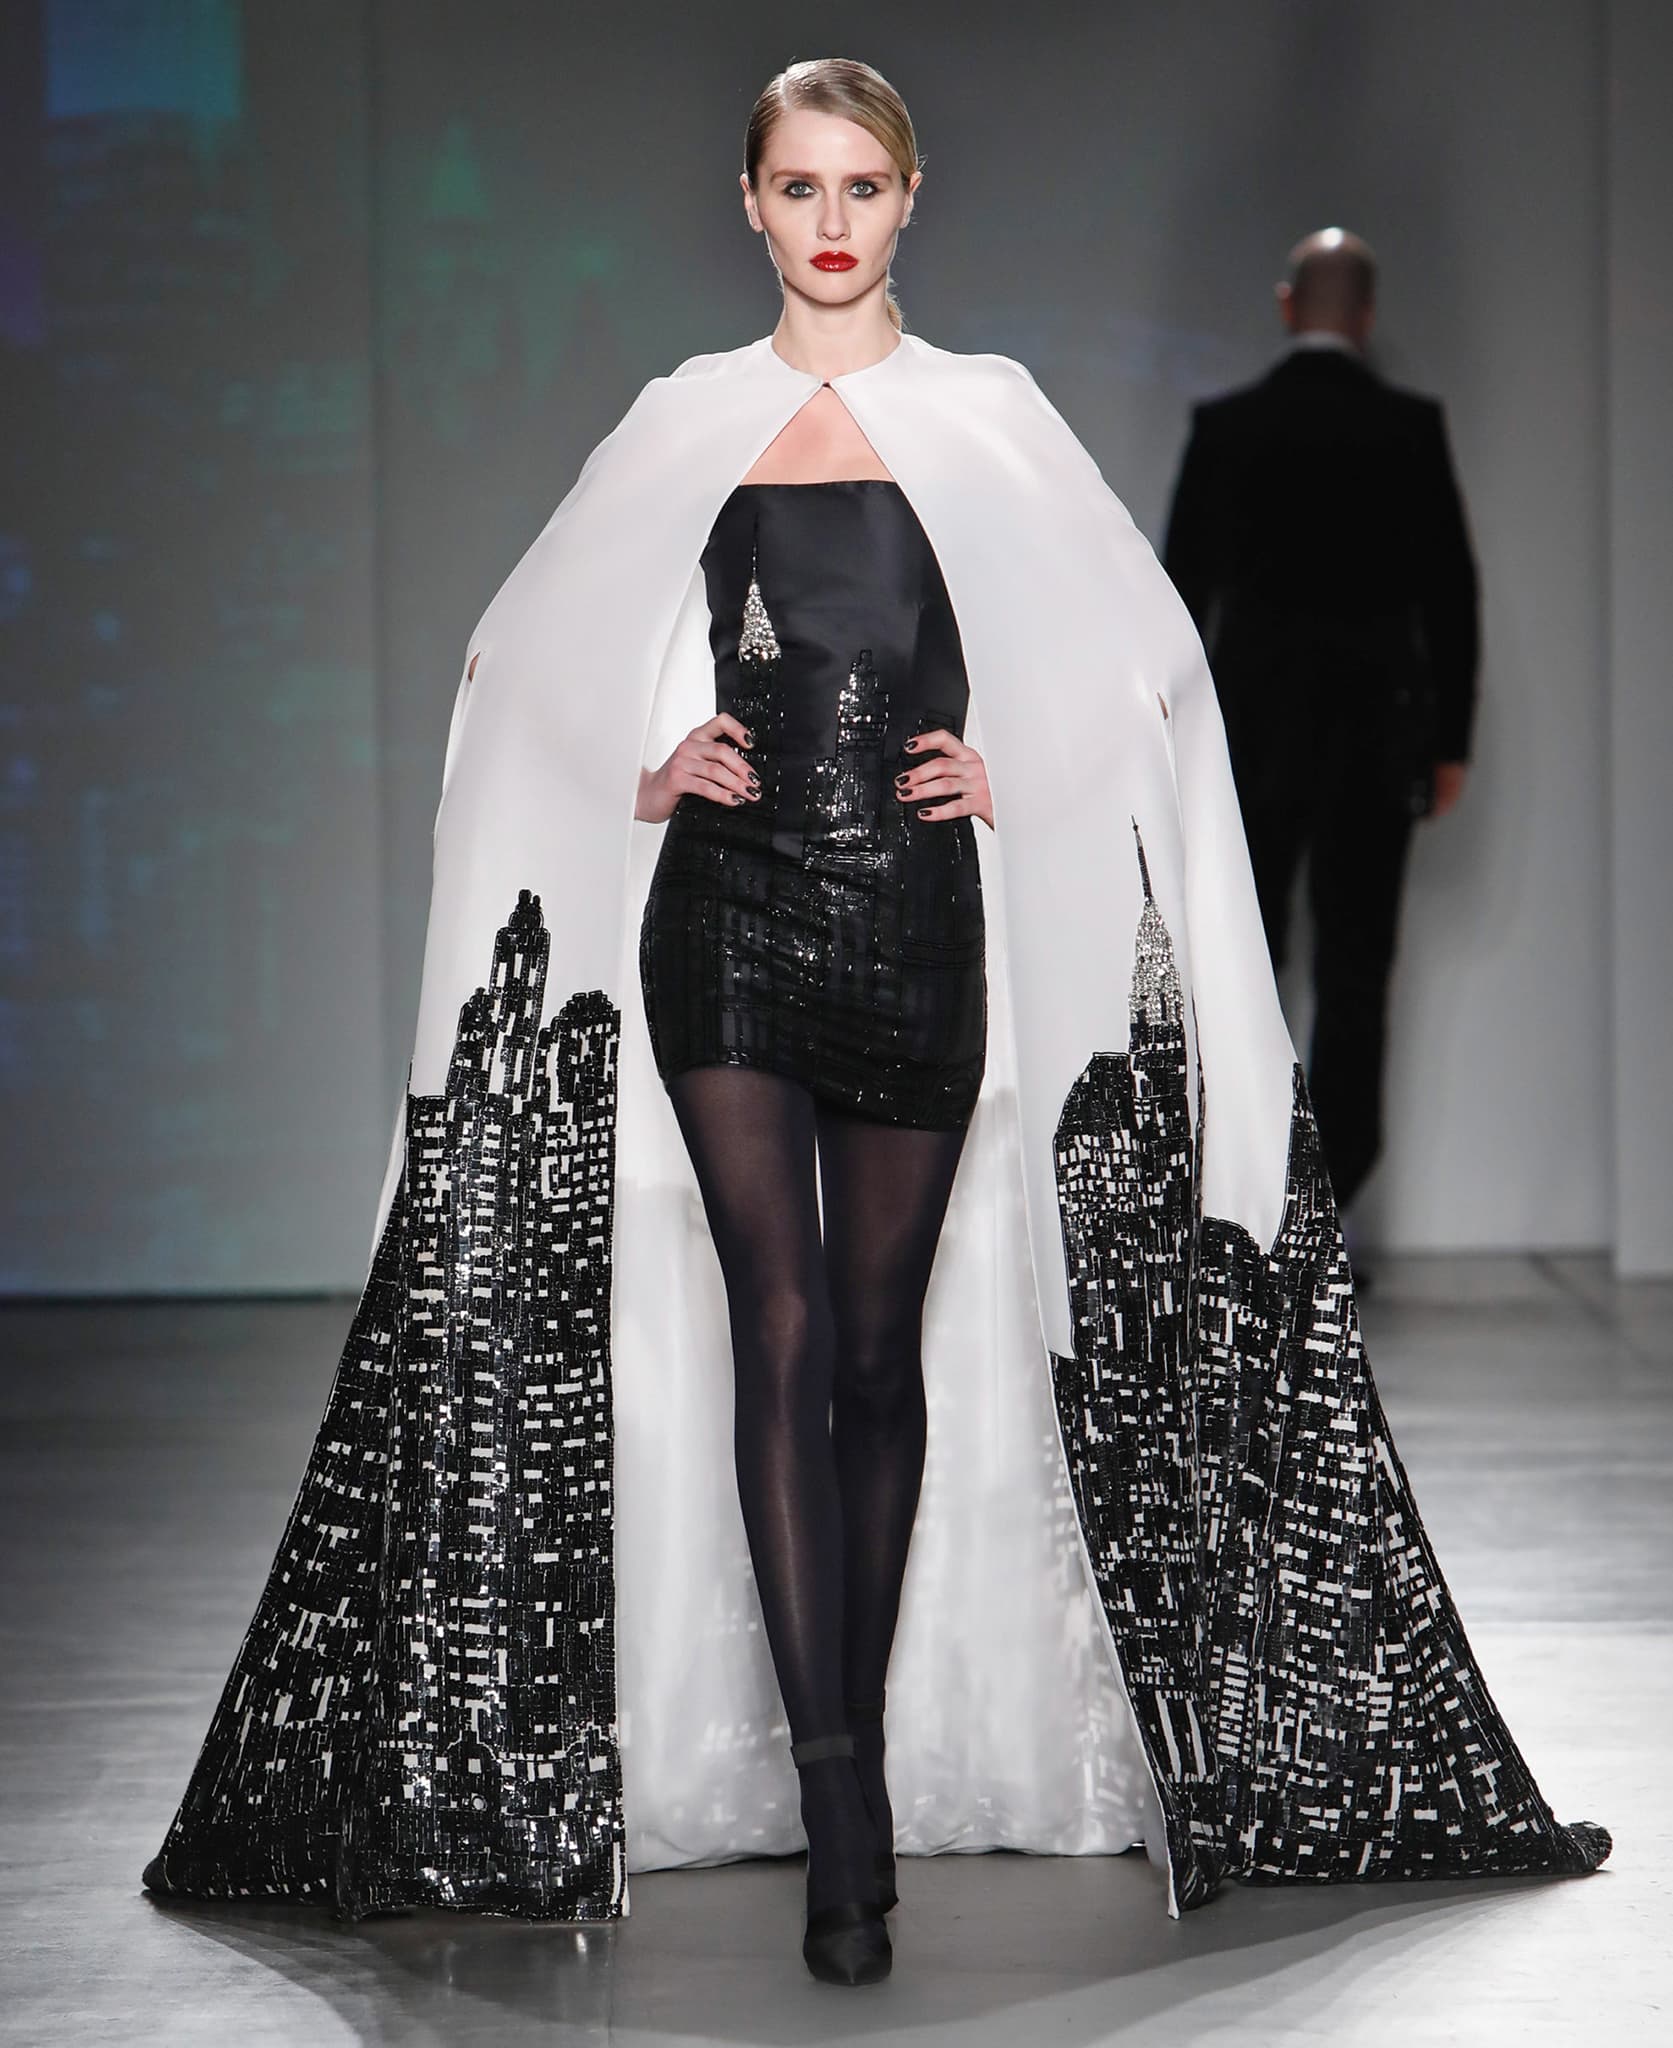 Zang Toi debuted his New York City skyline cape in 2009 and showcased it again at the 2020 New York Fashion Week